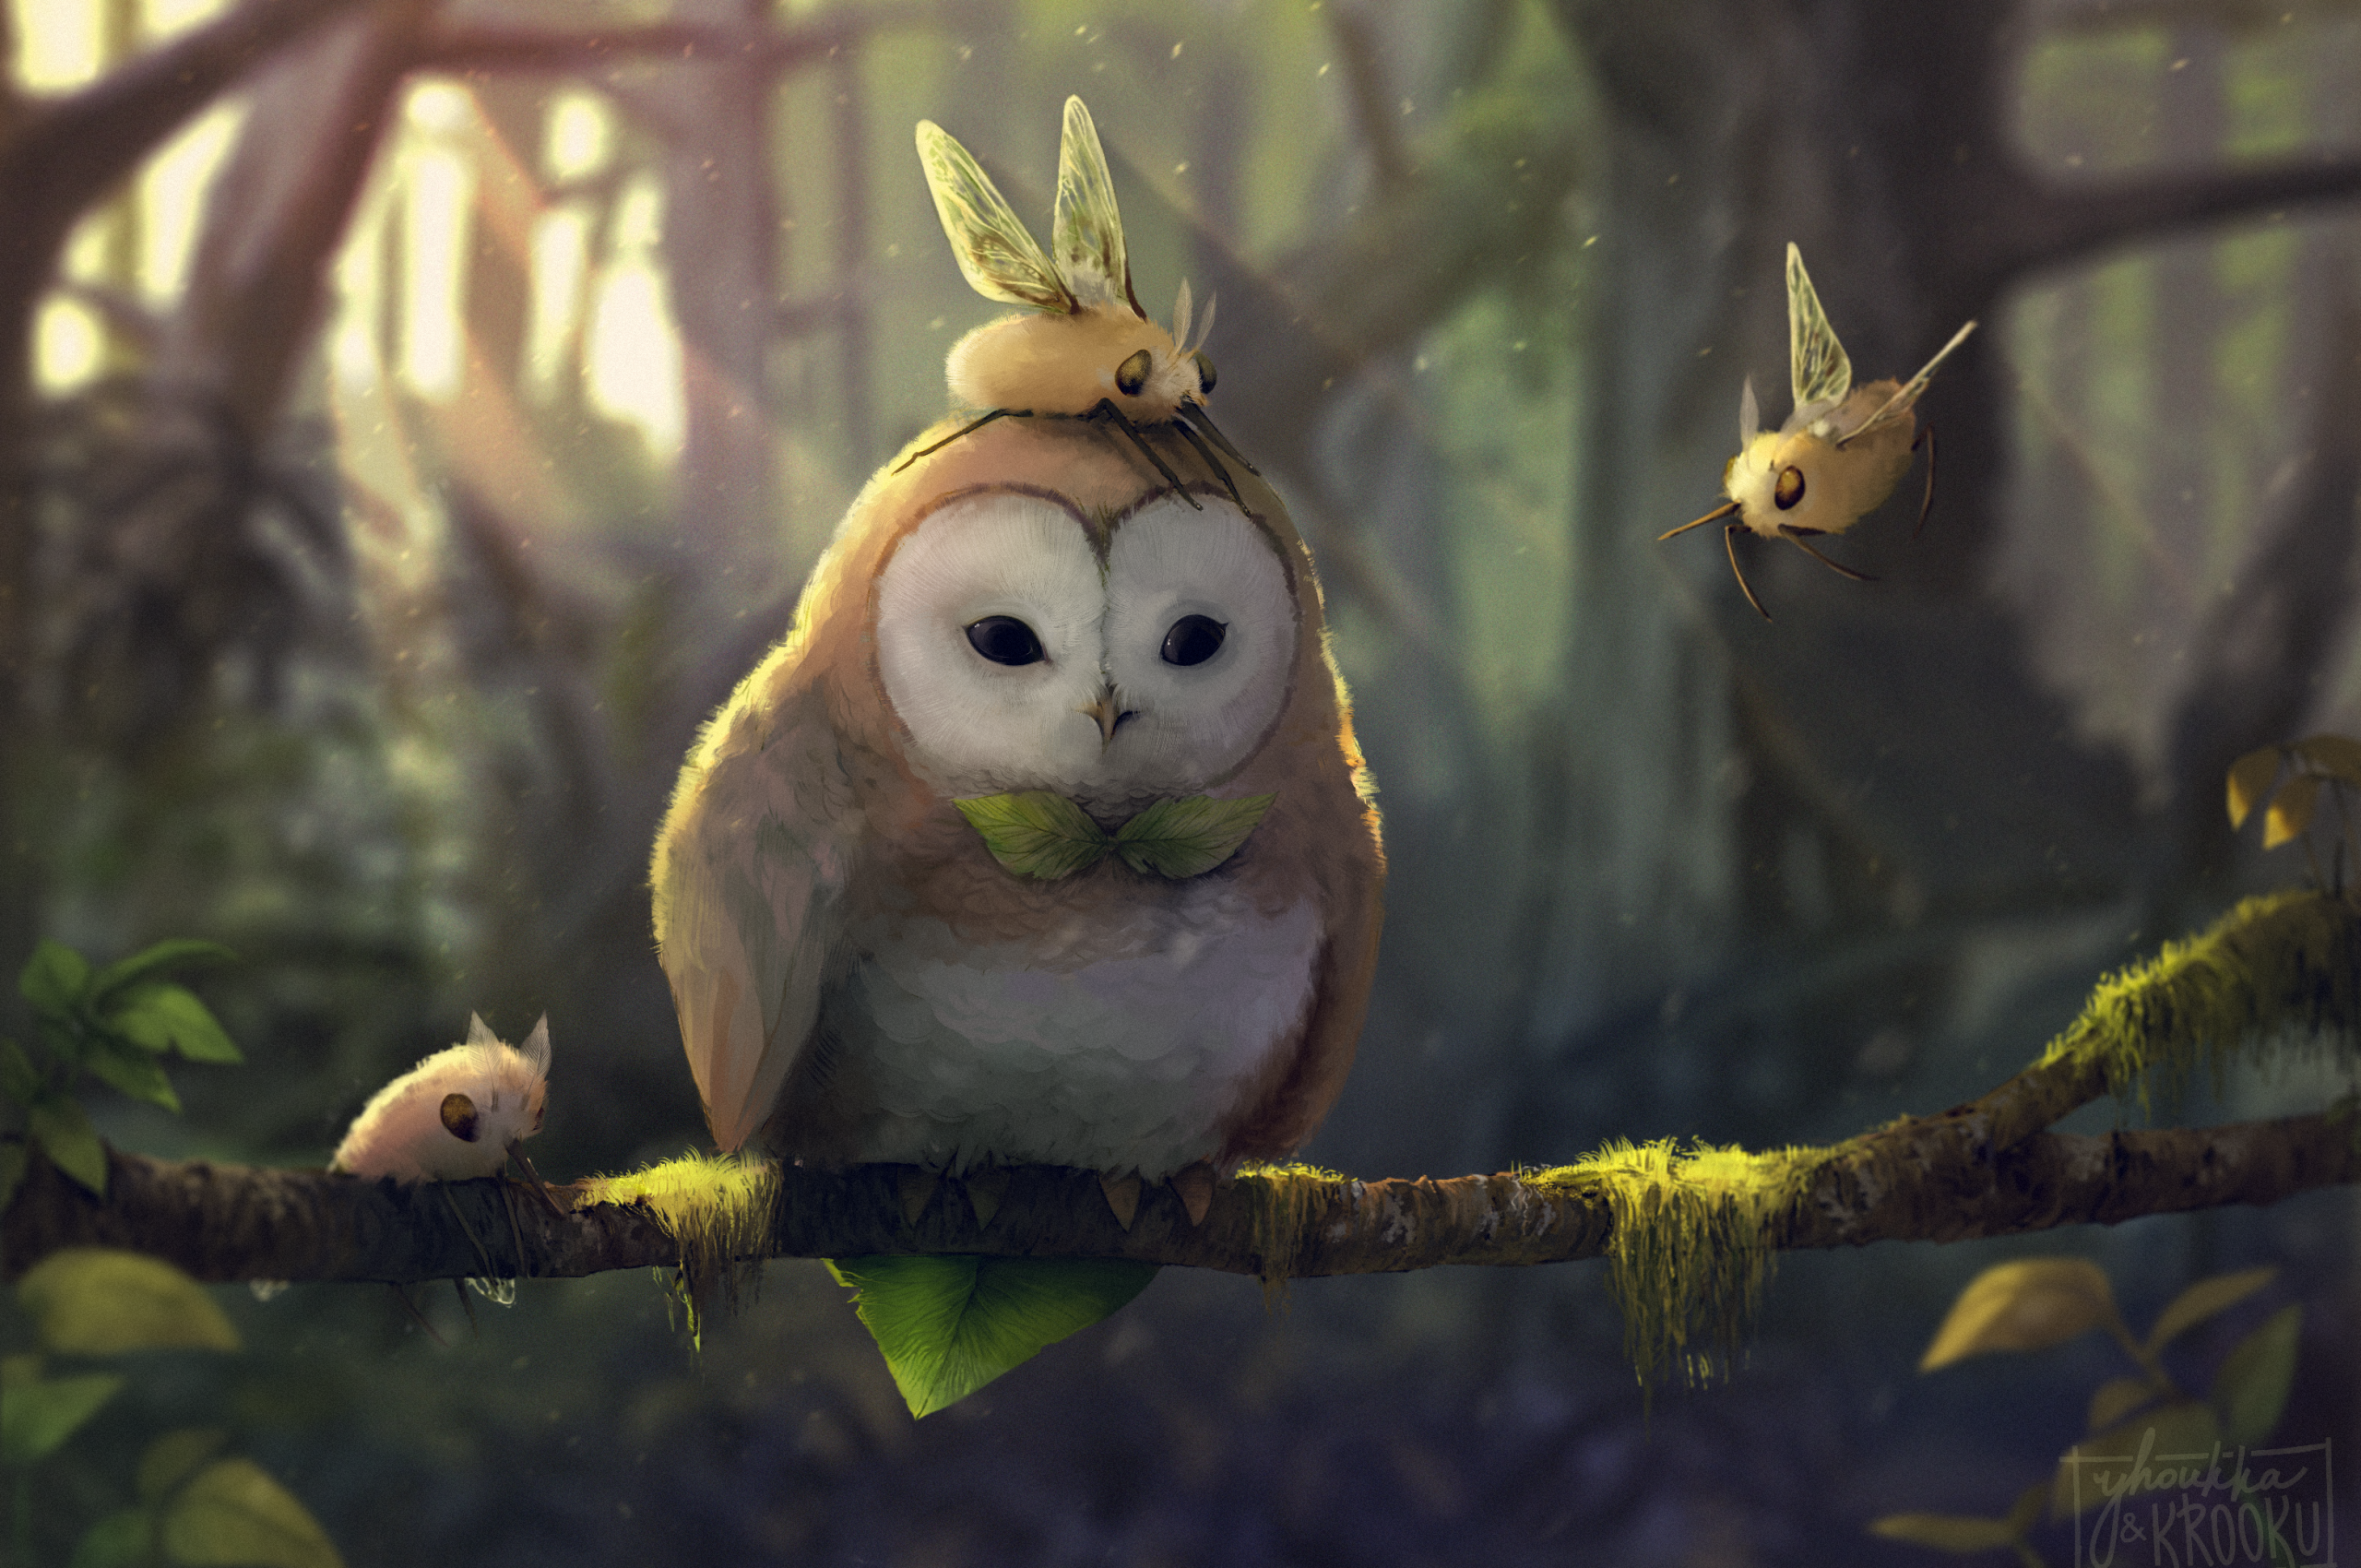 2560x1700 Download 2560x1700 Owl Insects Artwork Forest Sunbeam Painting Branch Wallpaper For Chromebook Pixel